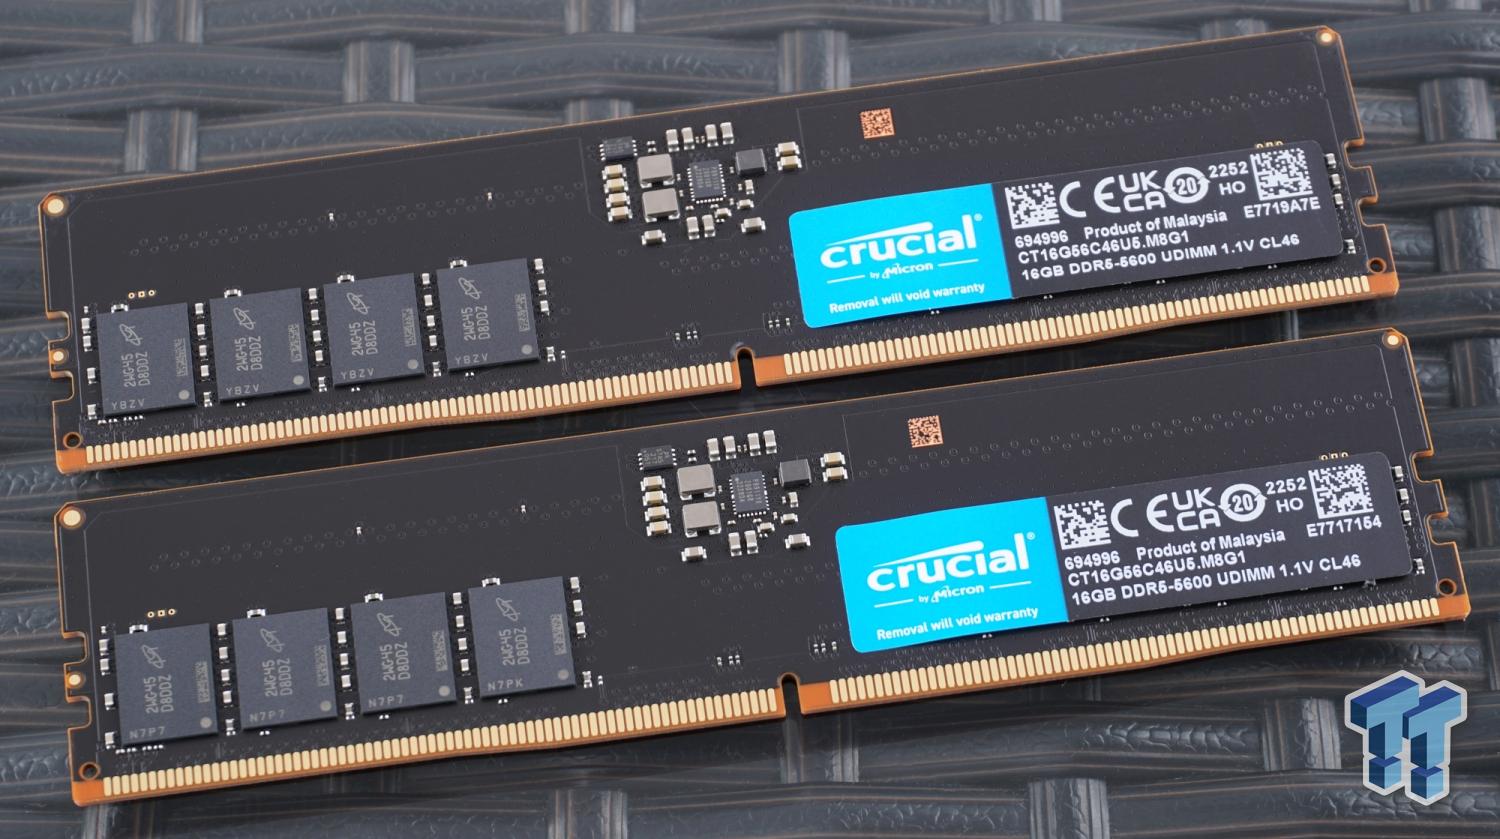 Crucial CT16G56C46U5 X2 DDR5-5600 32GB Dual-Channel Memory Kit Review